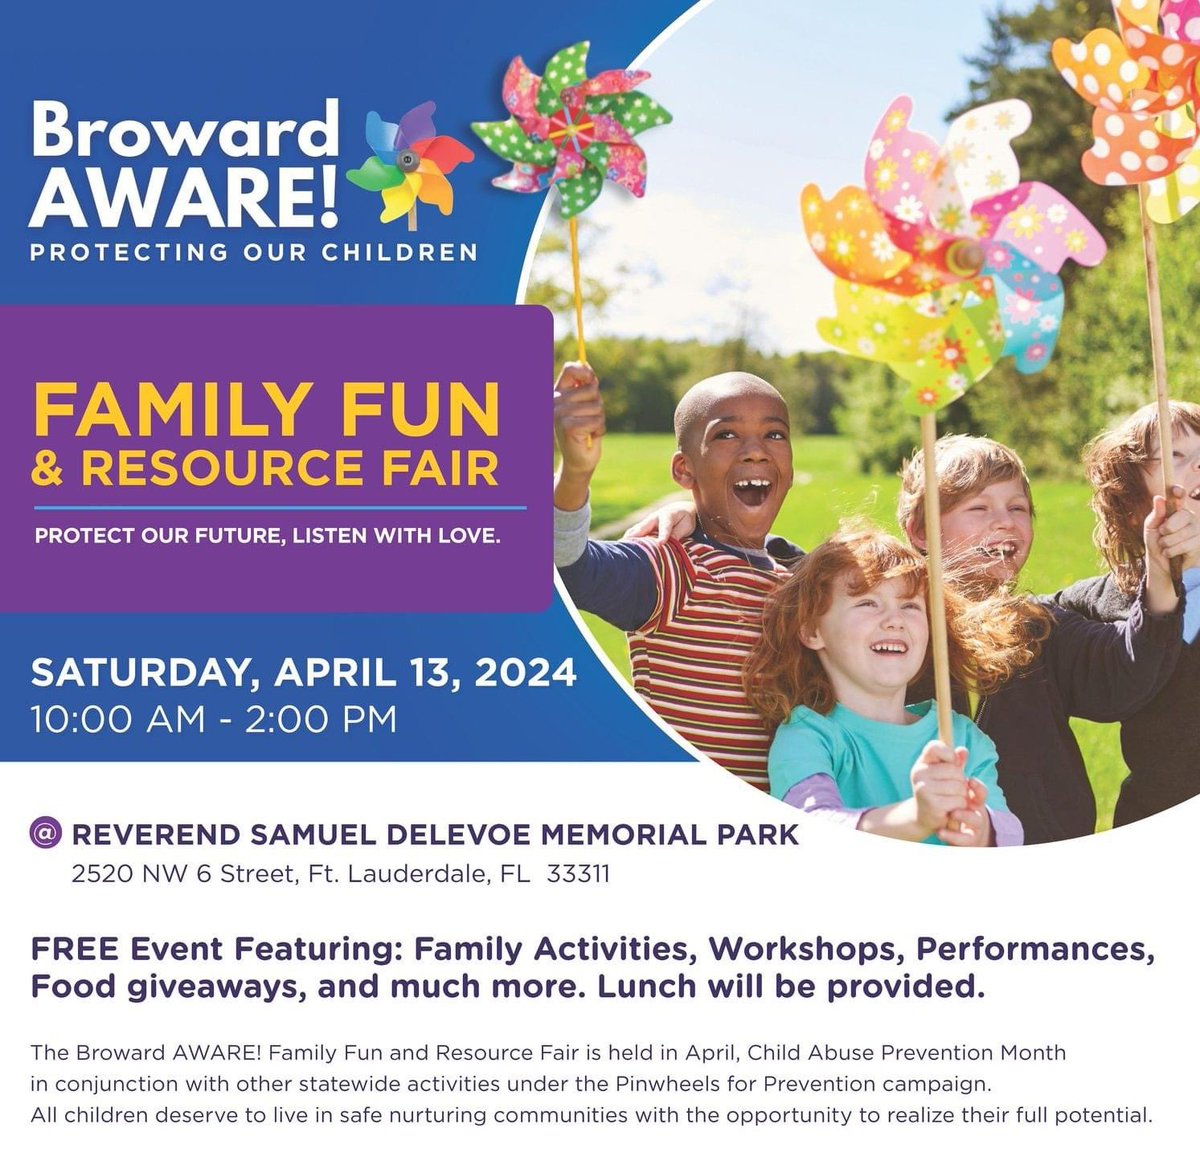 🎉 Don't miss the Broward AWARE! Family Fun and Resource Fair at Rev. Samuel Delevoe Park on April 13th, 10am-2pm! Free family activities, workshops, food, and more! Don't miss out! #FamilyFunFair #ProtectingOurChildren @CSCBroward Click here for details: cscbroward.org